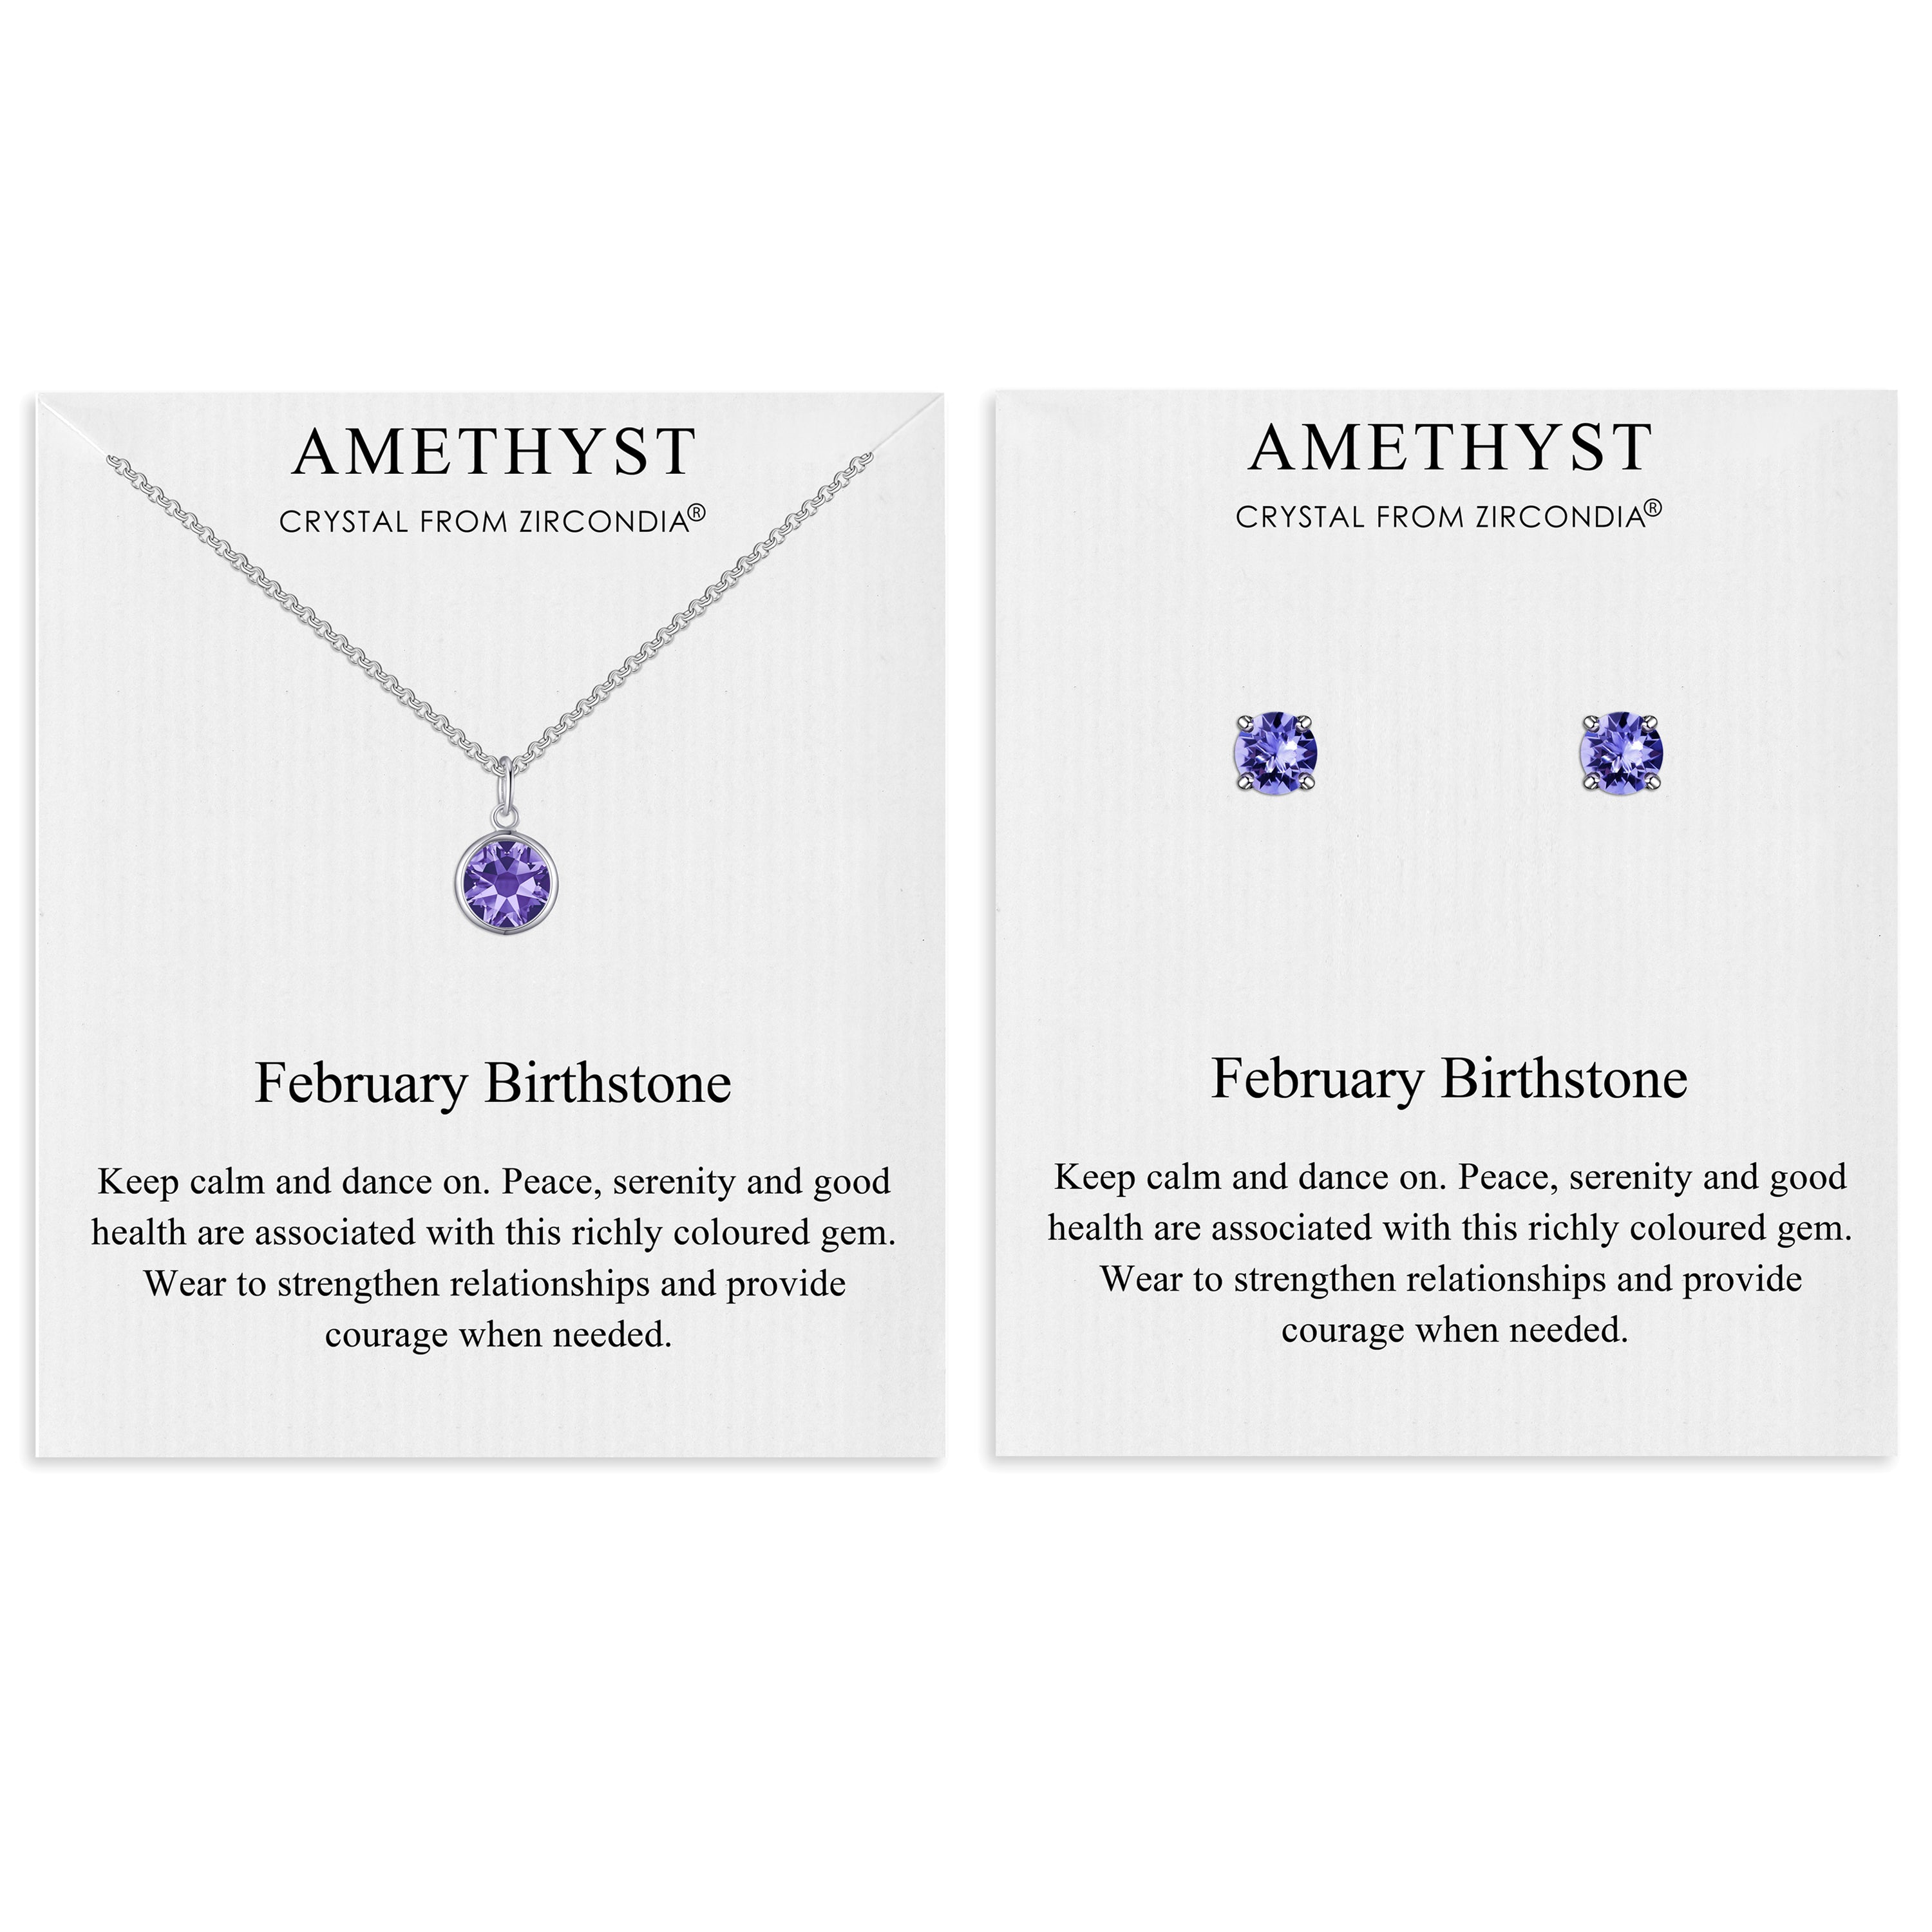 February (Amethyst) Birthstone Necklace & Earrings Set Created with Zircondia® Crystals by Philip Jones Jewellery